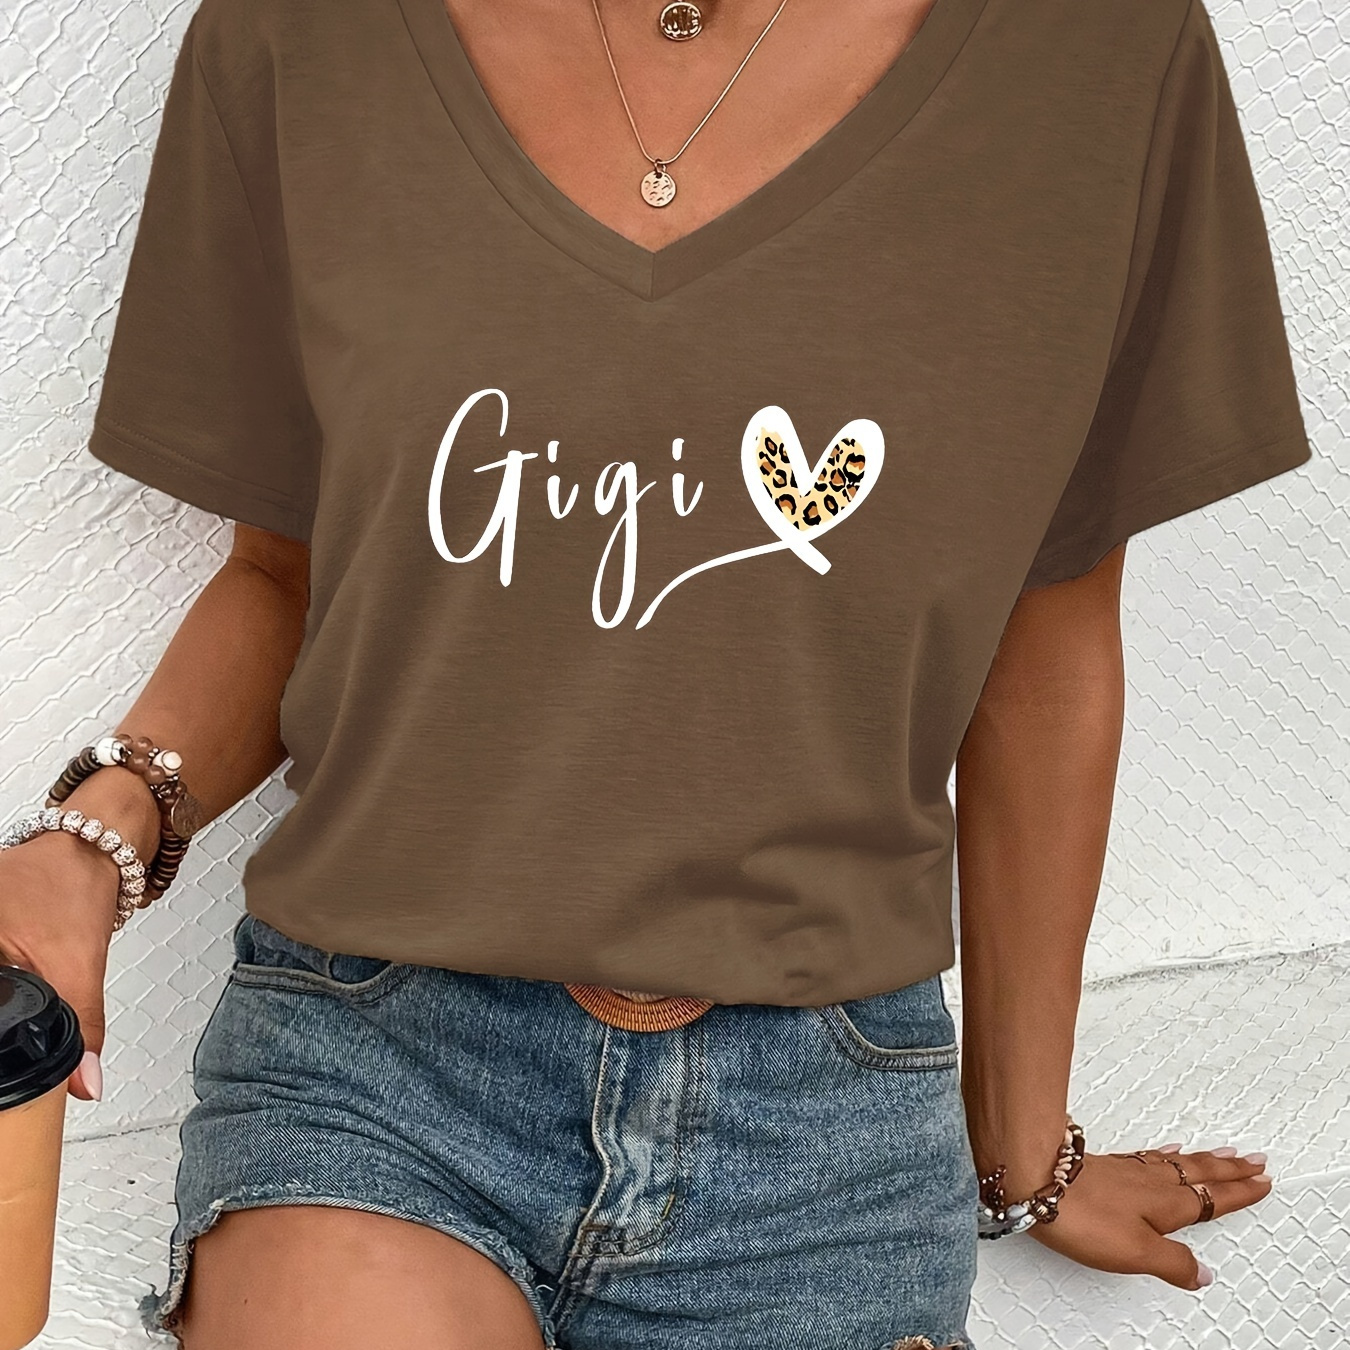 

Heart & Gigi Letter Print Casual T-shirt, Short Sleeves V Neck Stretchy Fashion Sports Tee, Valentine's Day Women's Tops